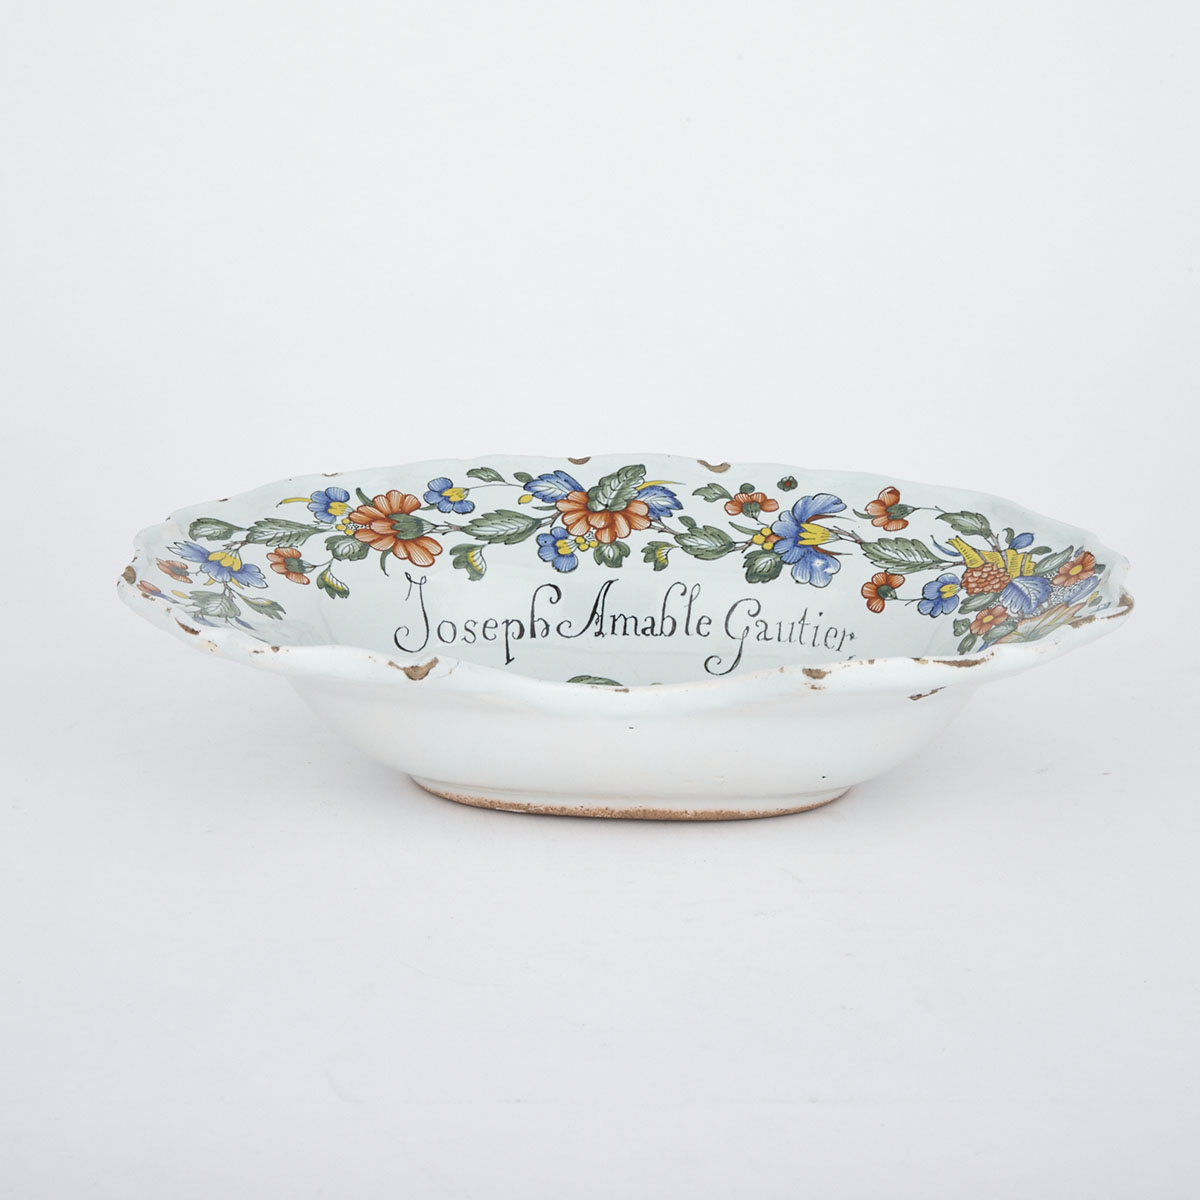 French Faience Barber’s Bowl, late 19th/early 20th century